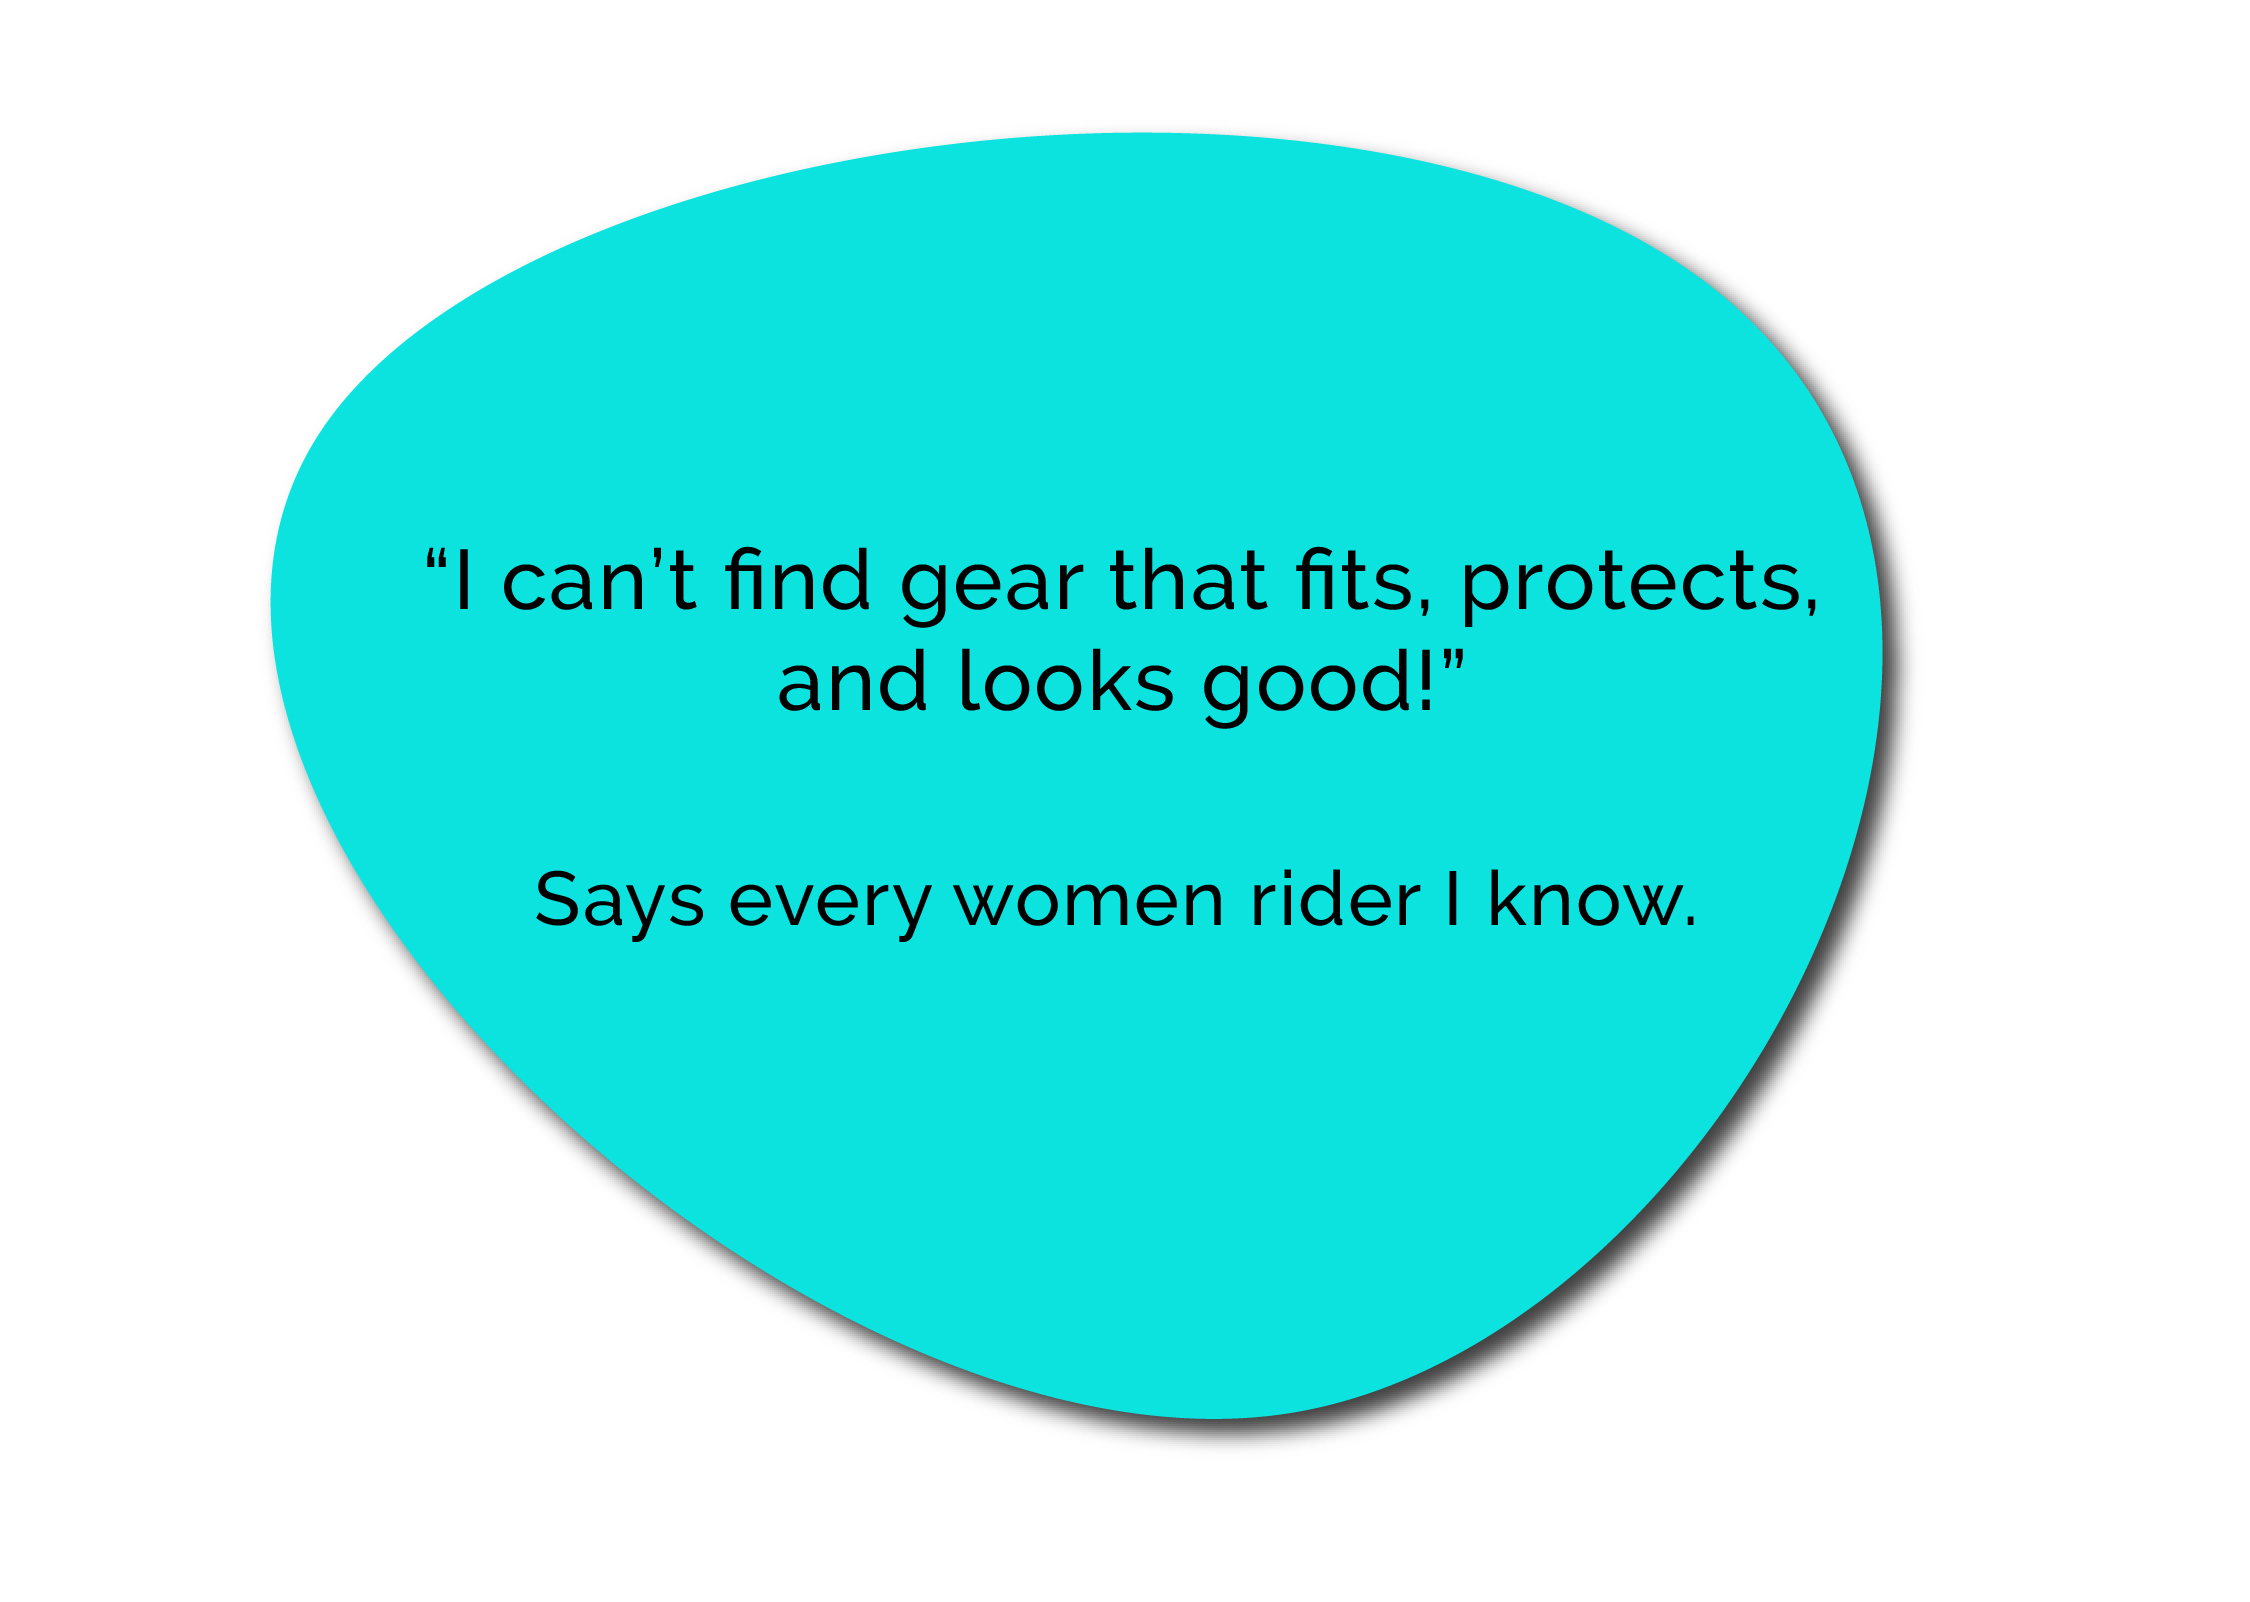 Women riders can't find gear that fits, protects, and looks good. 